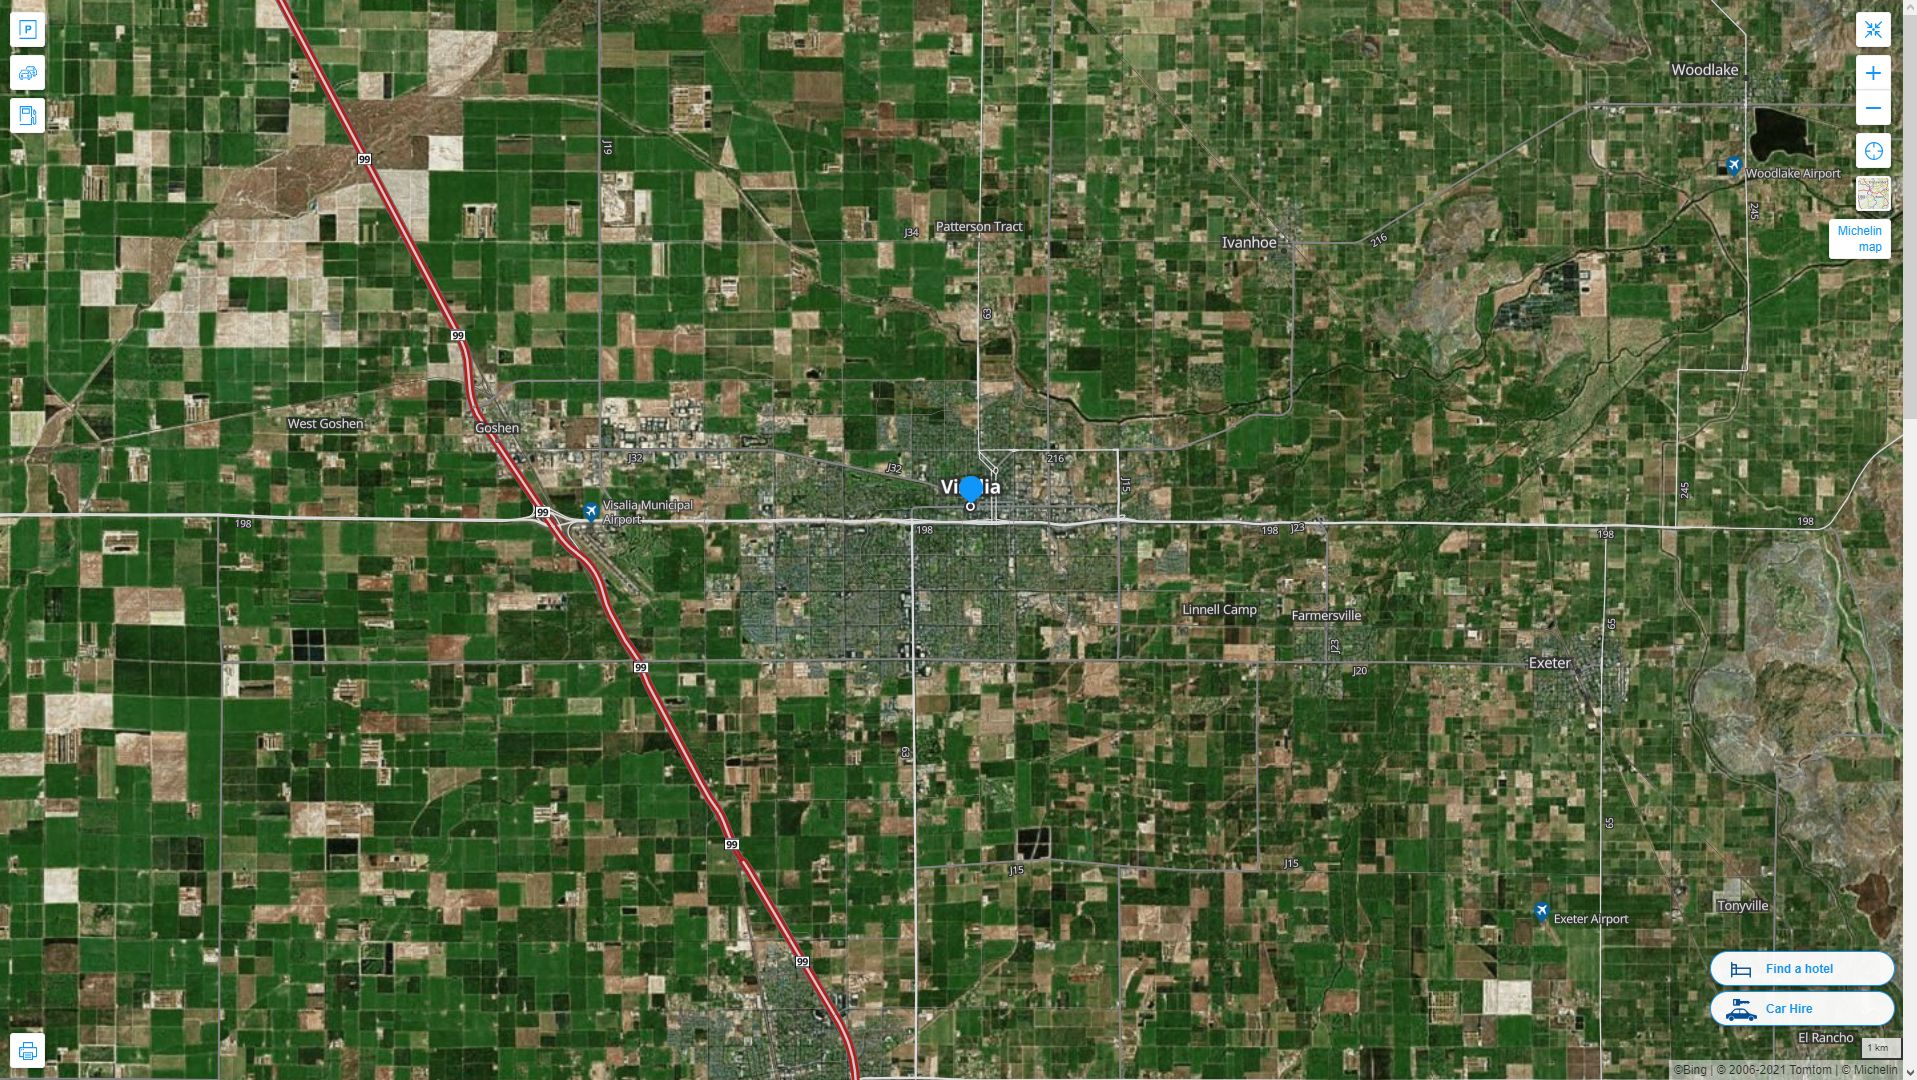 Visalia California Highway and Road Map with Satellite View